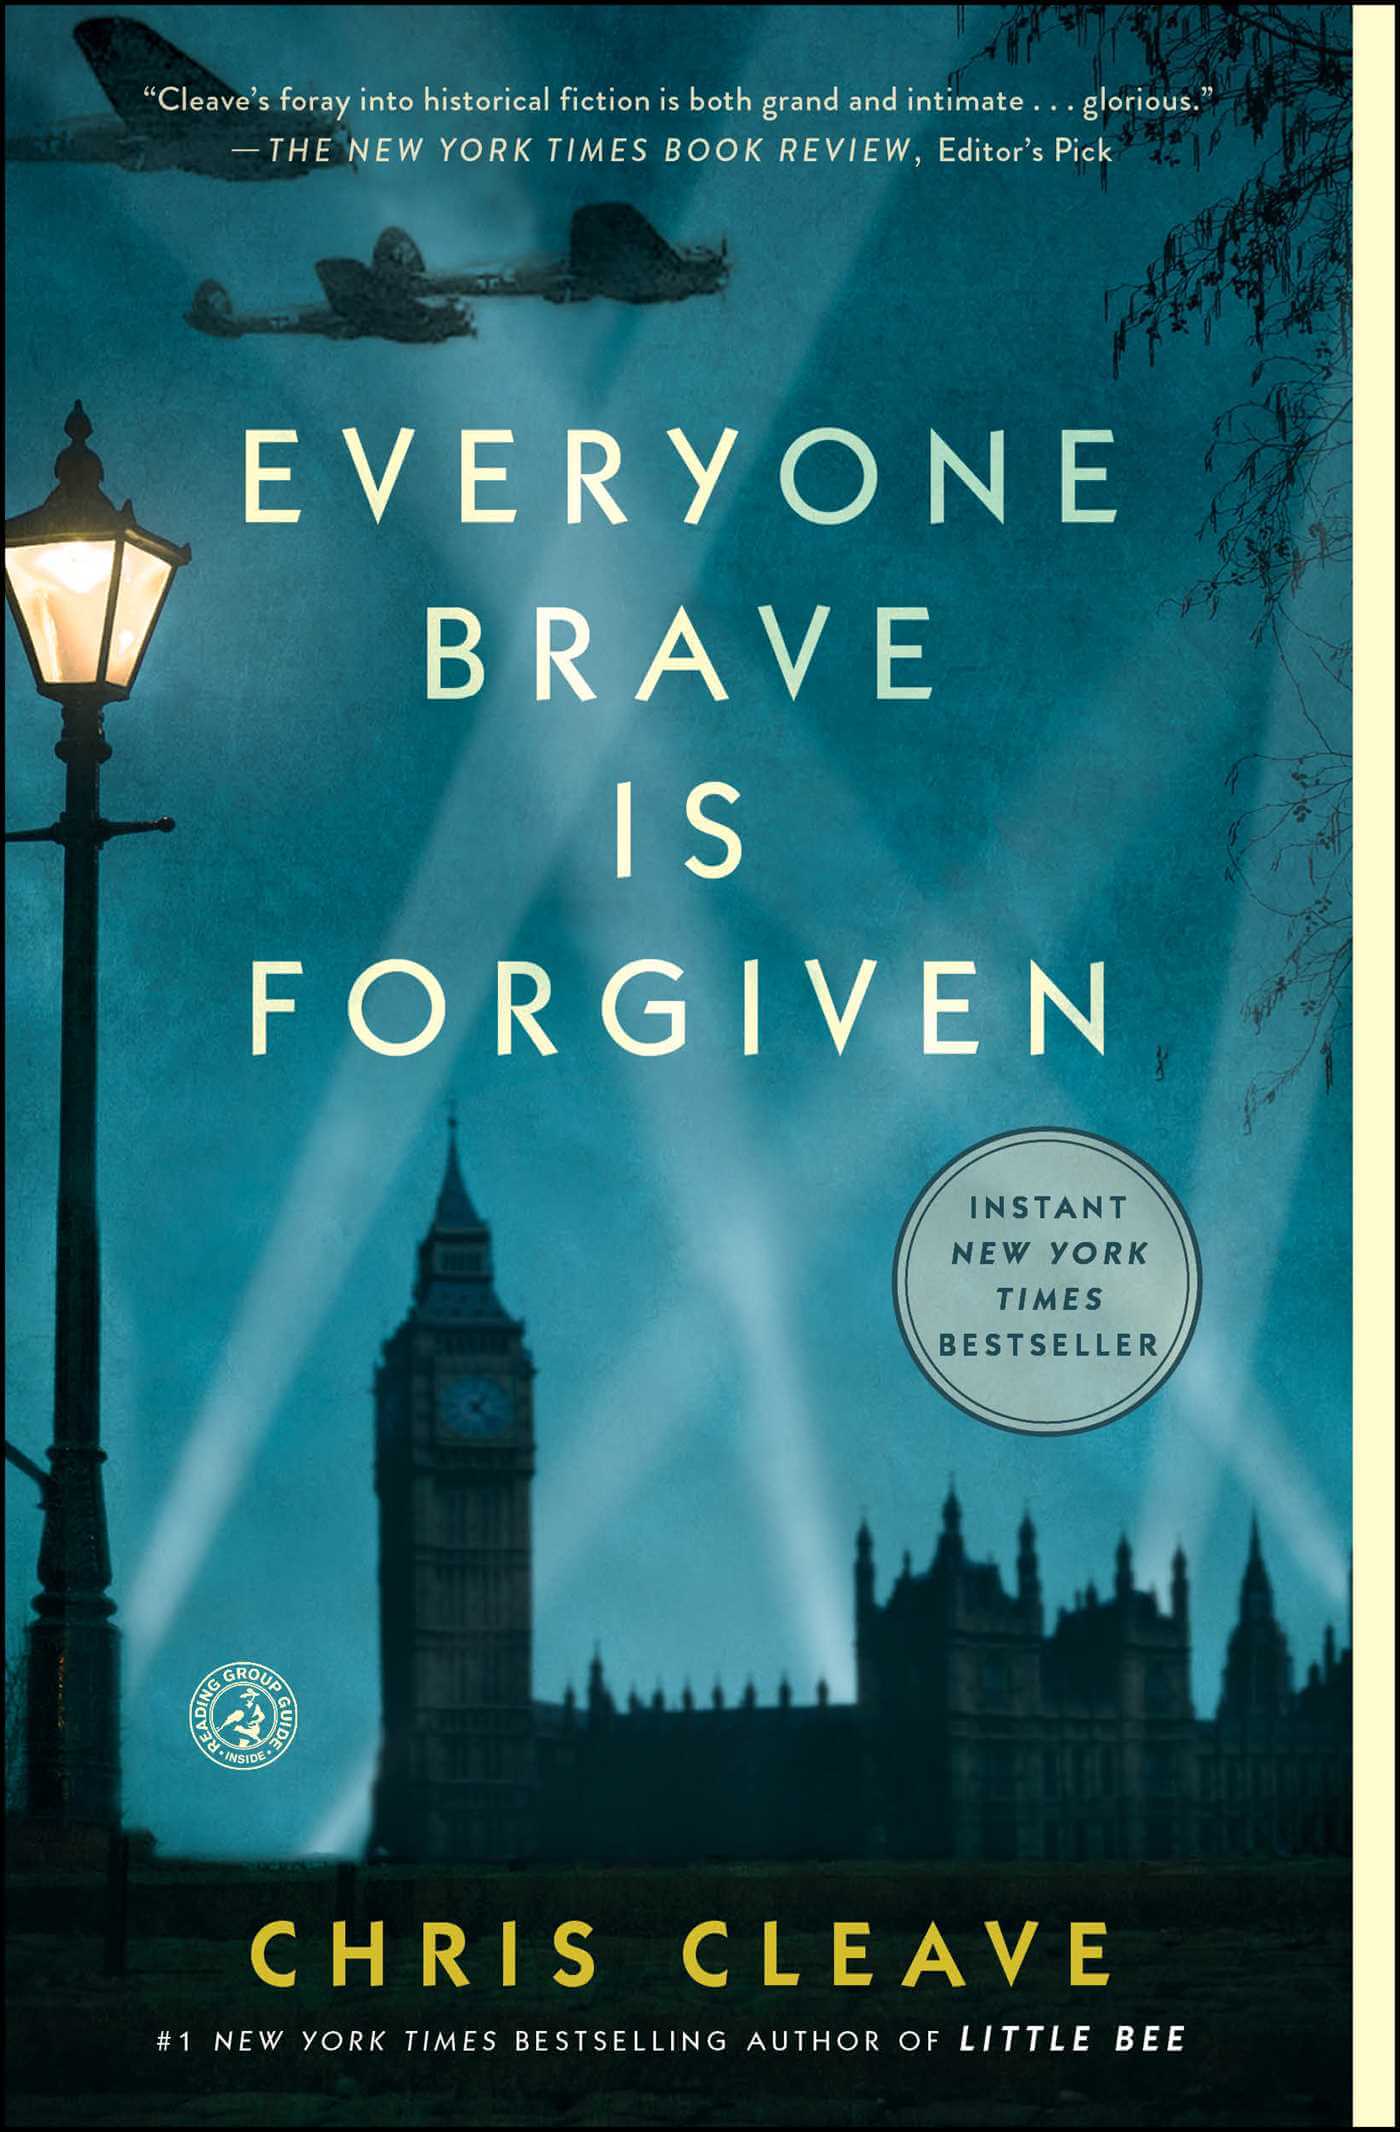 Cover of Everyone Brave is Forgiven by Chris Cleave